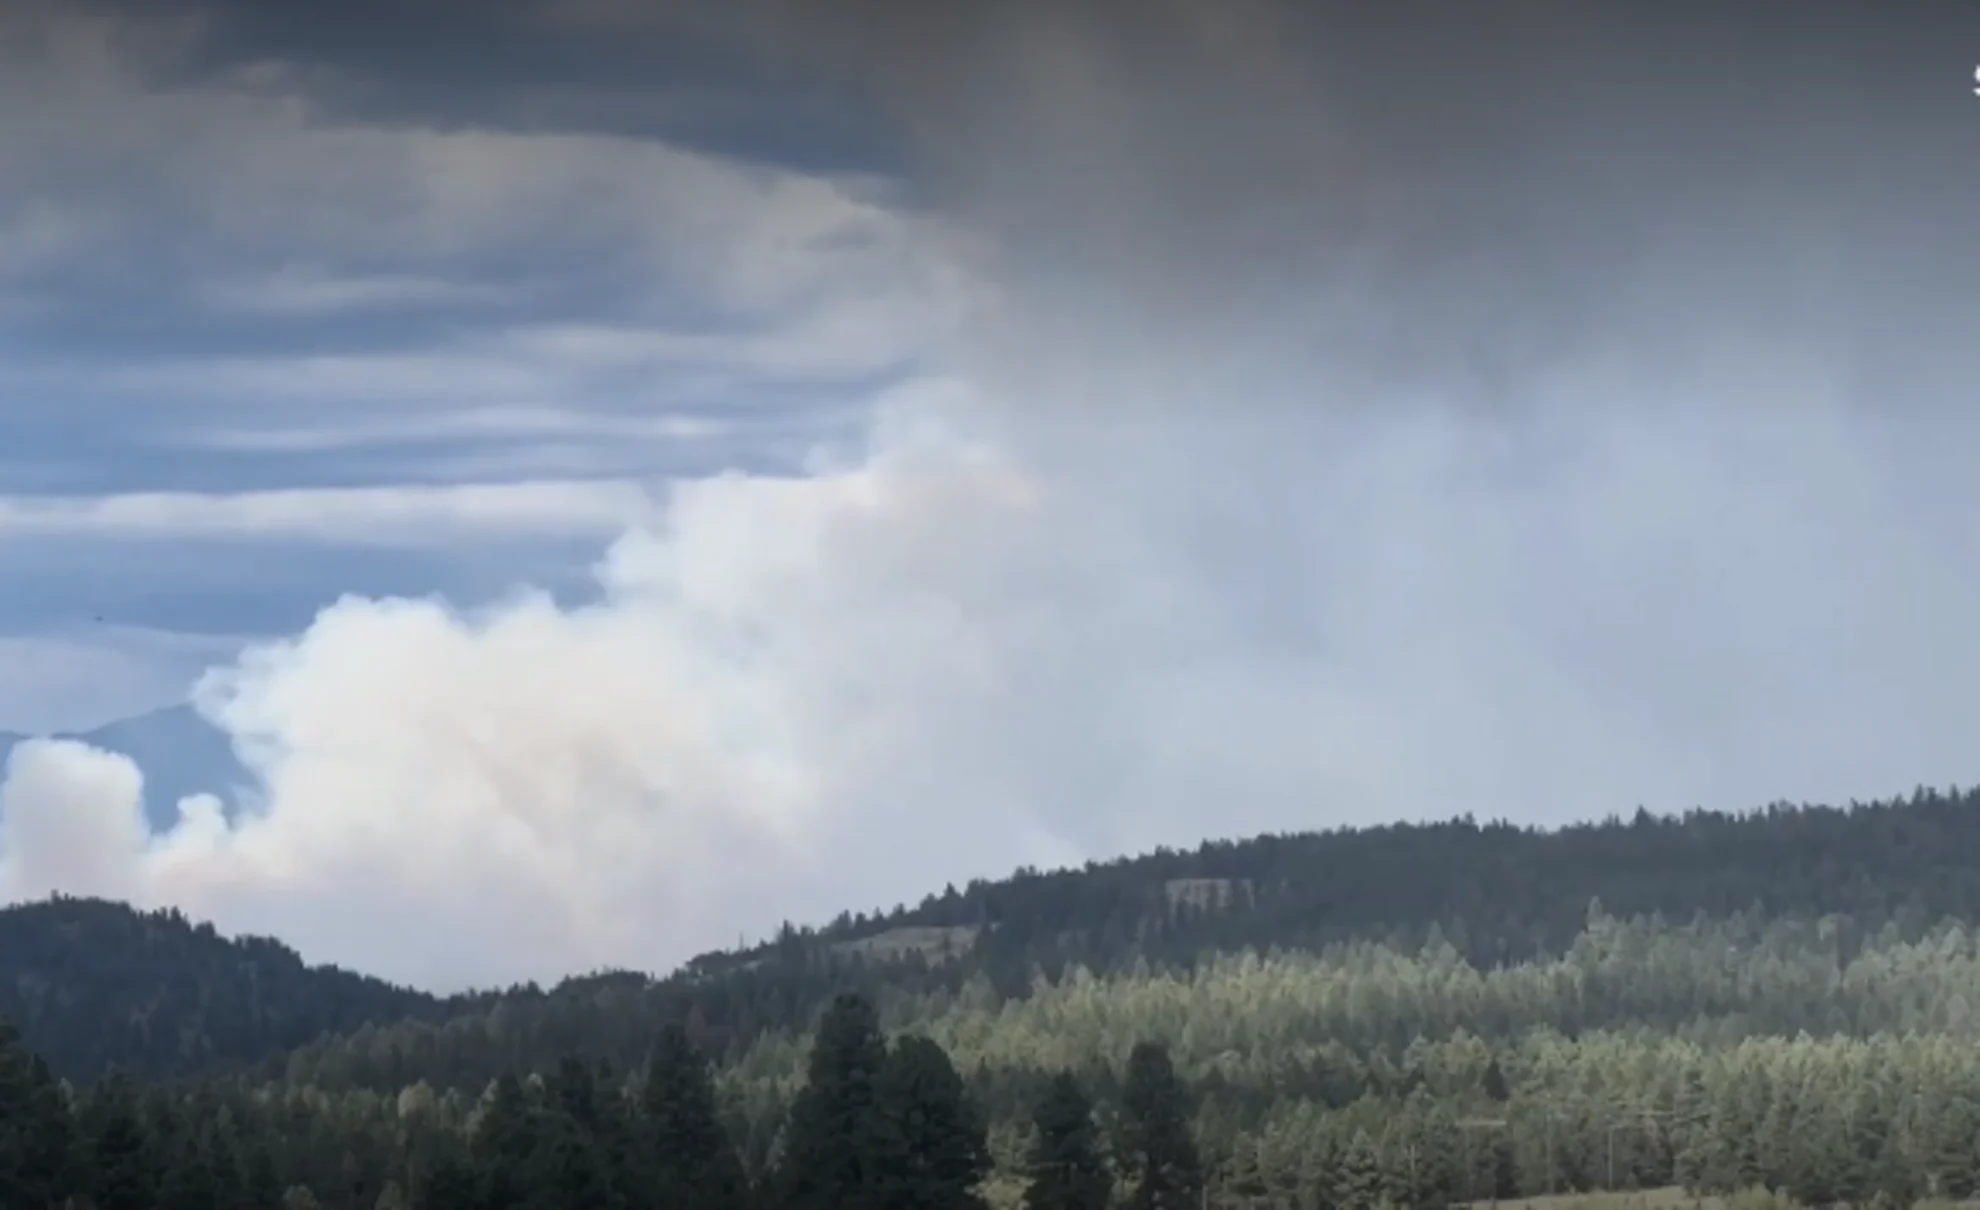 Wildfire near Cranbrook more than doubles in size in 24 hours, forces evacuation